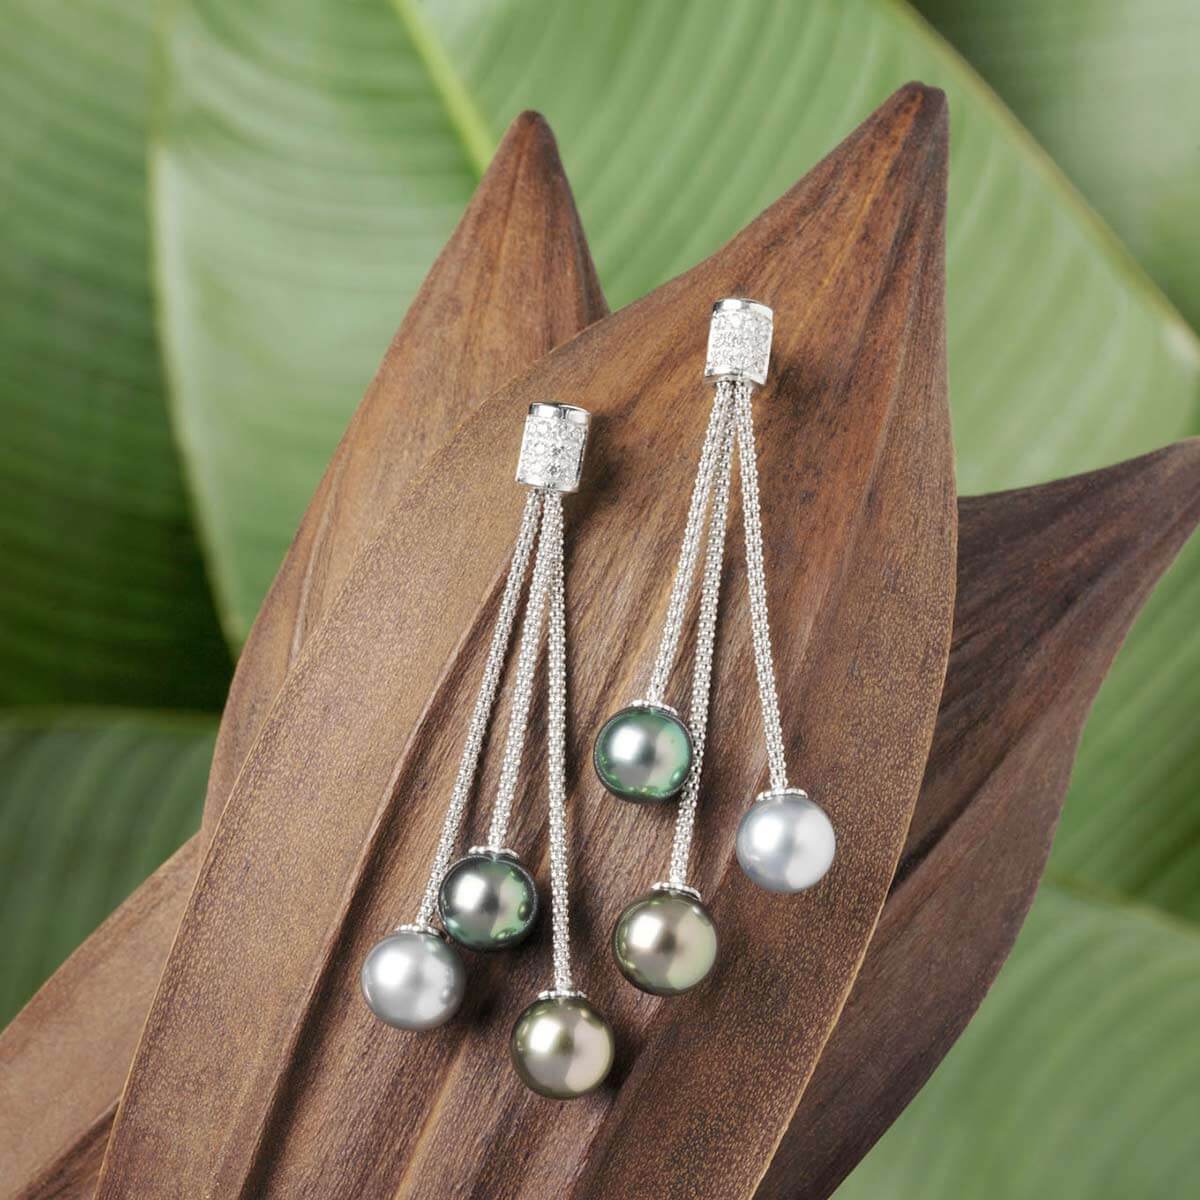 6 Tahitian Pearls diamond Earrings set in 18Kt white gold Also available in 18Kt yellow gold